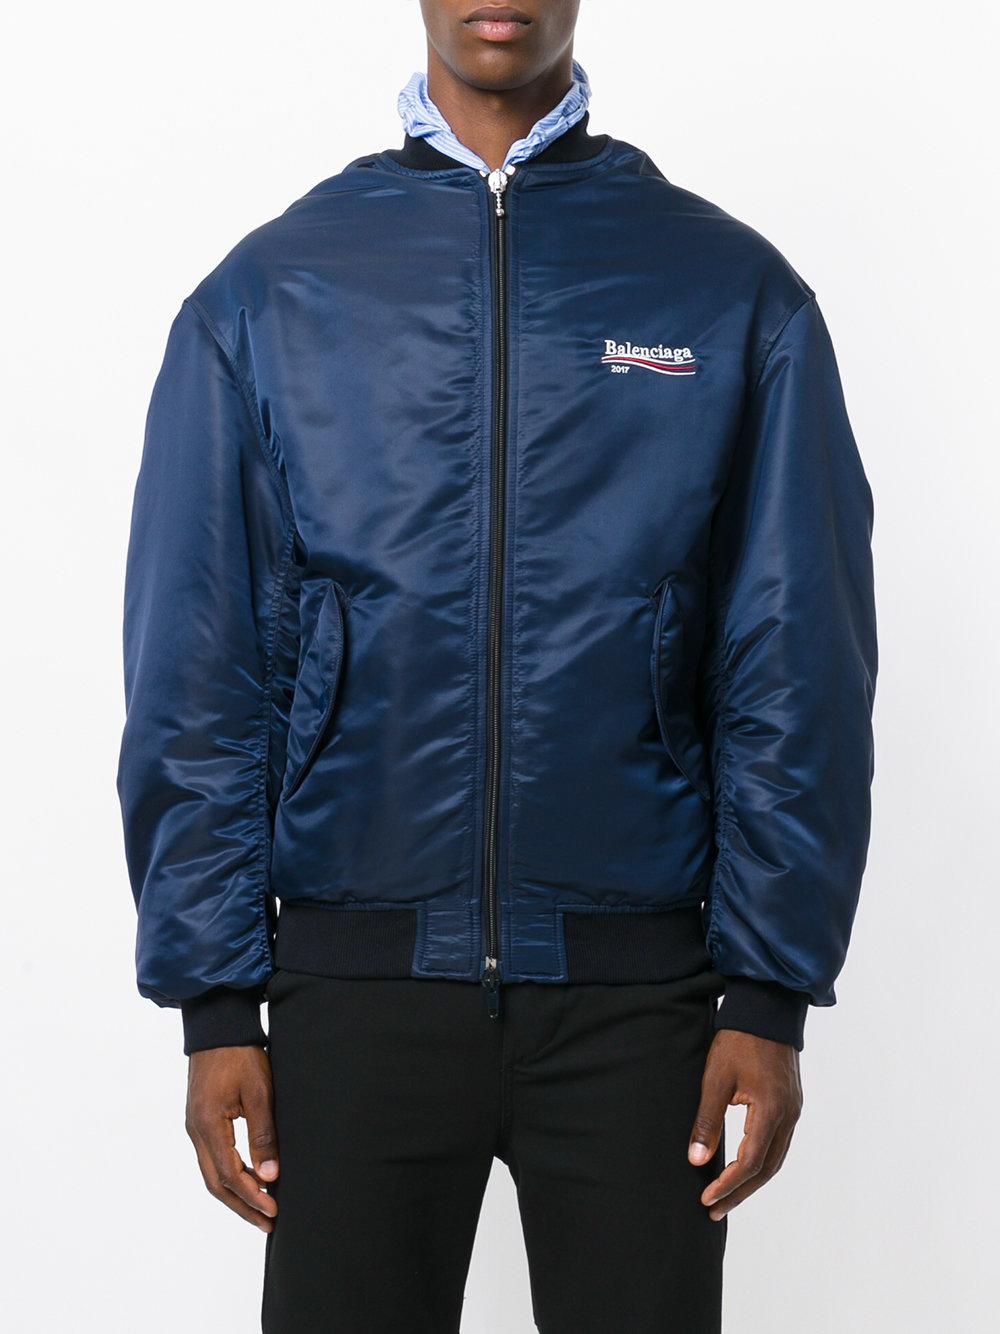 Balenciaga Synthetic 2017 Bomber Jacket in Blue for Men | Lyst